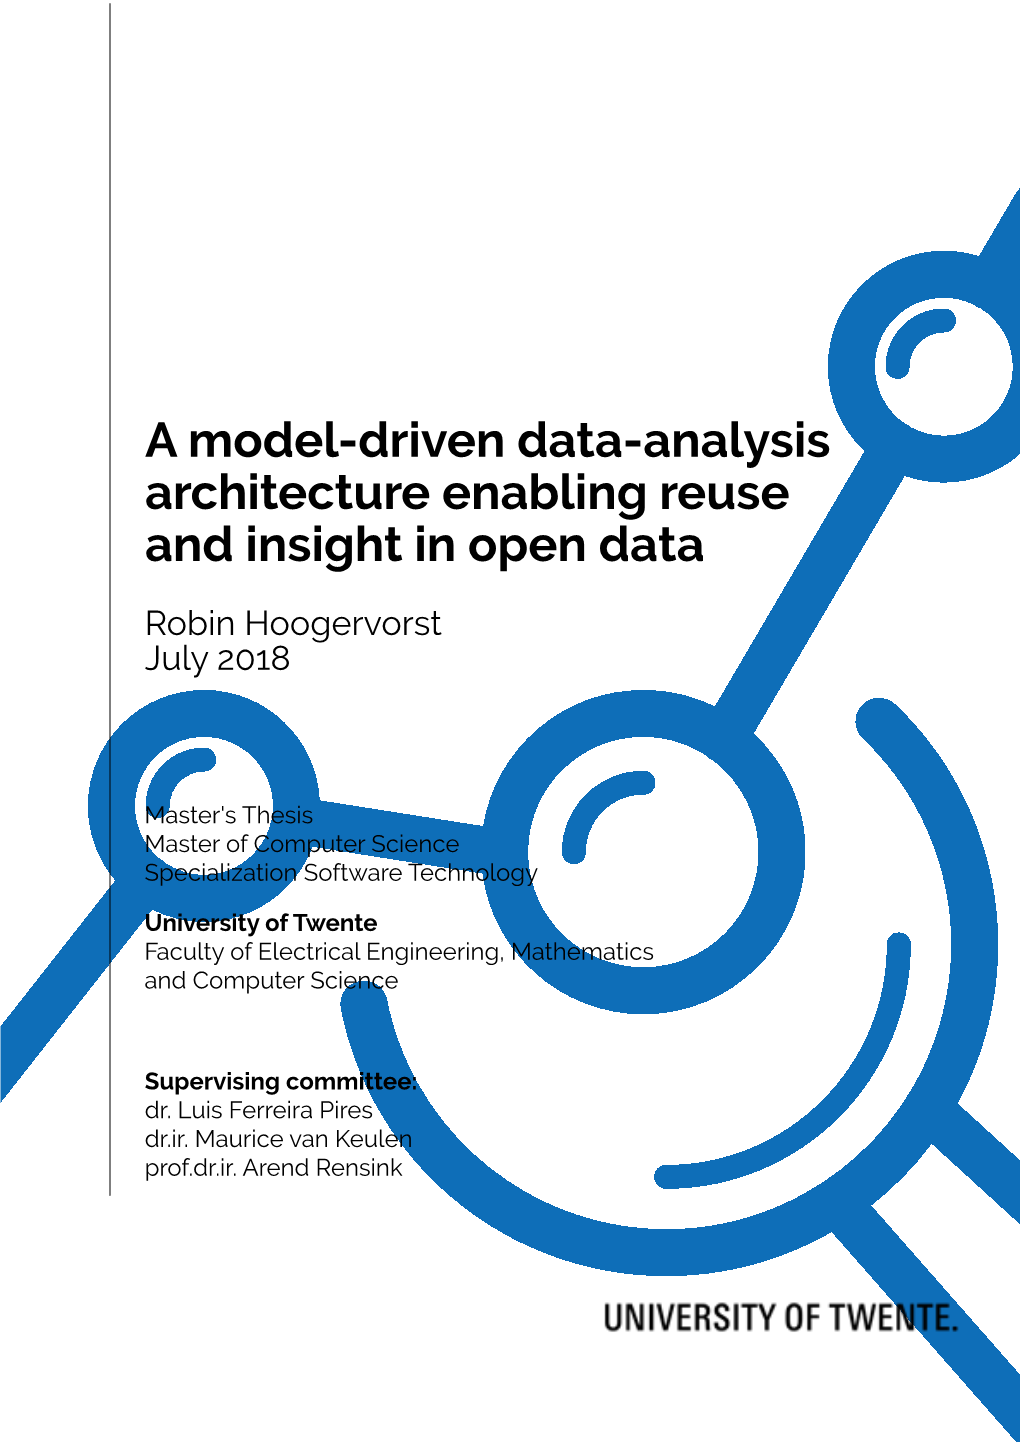 A Model-Driven Data-Analysis Architecture Enabling Reuse and Insight in Open Data